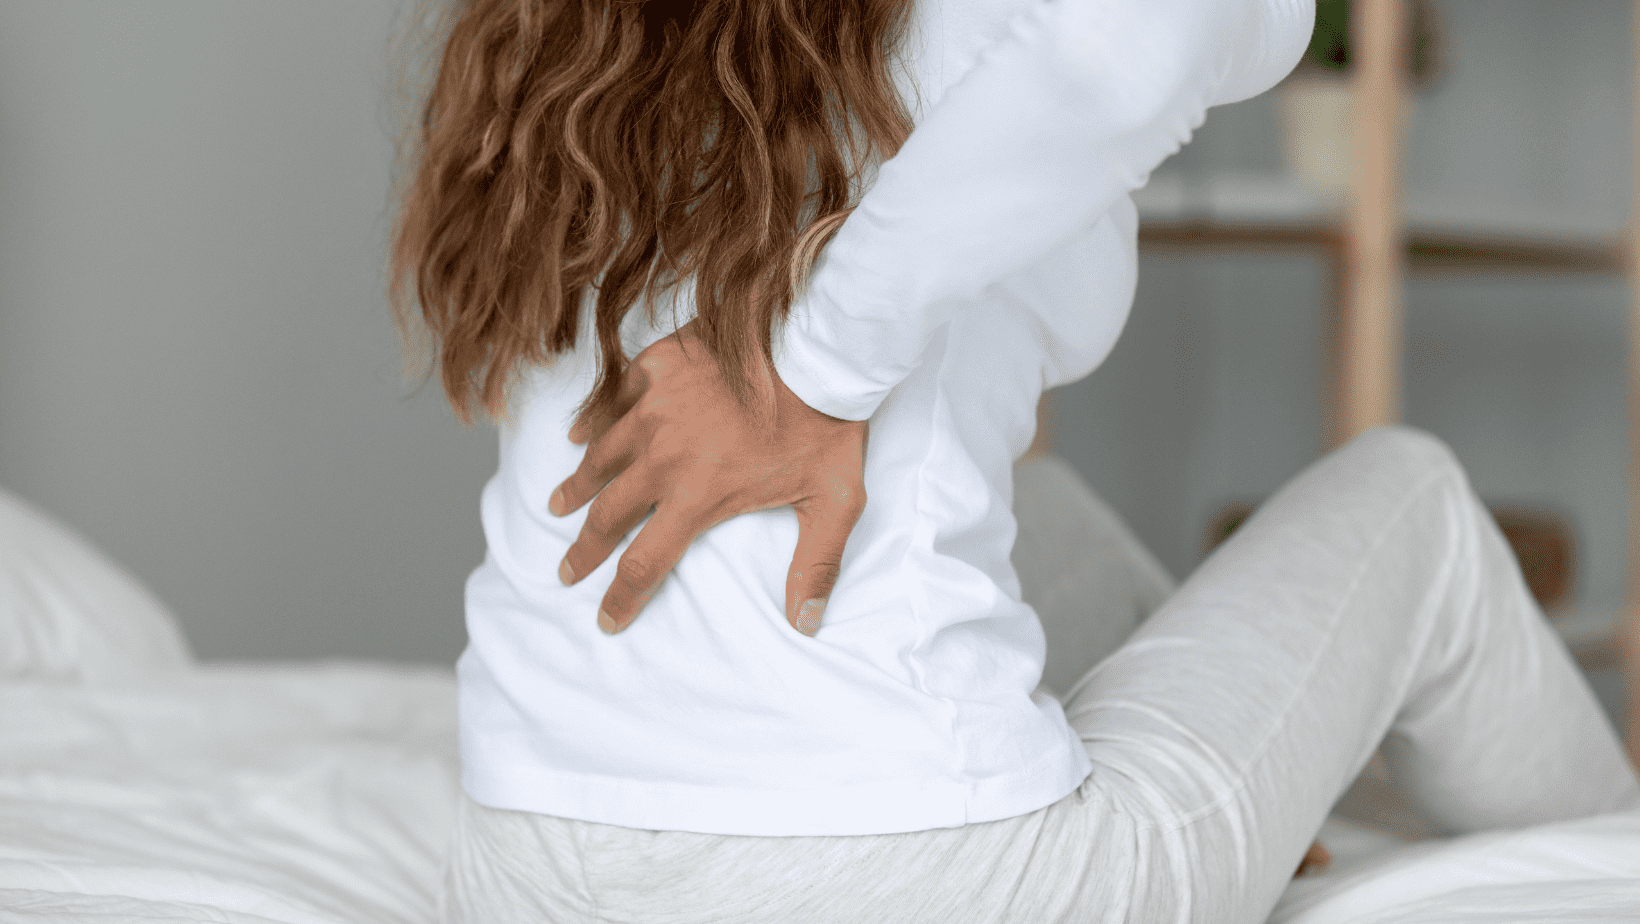 How To Know When Your Back Pain is Sciatica